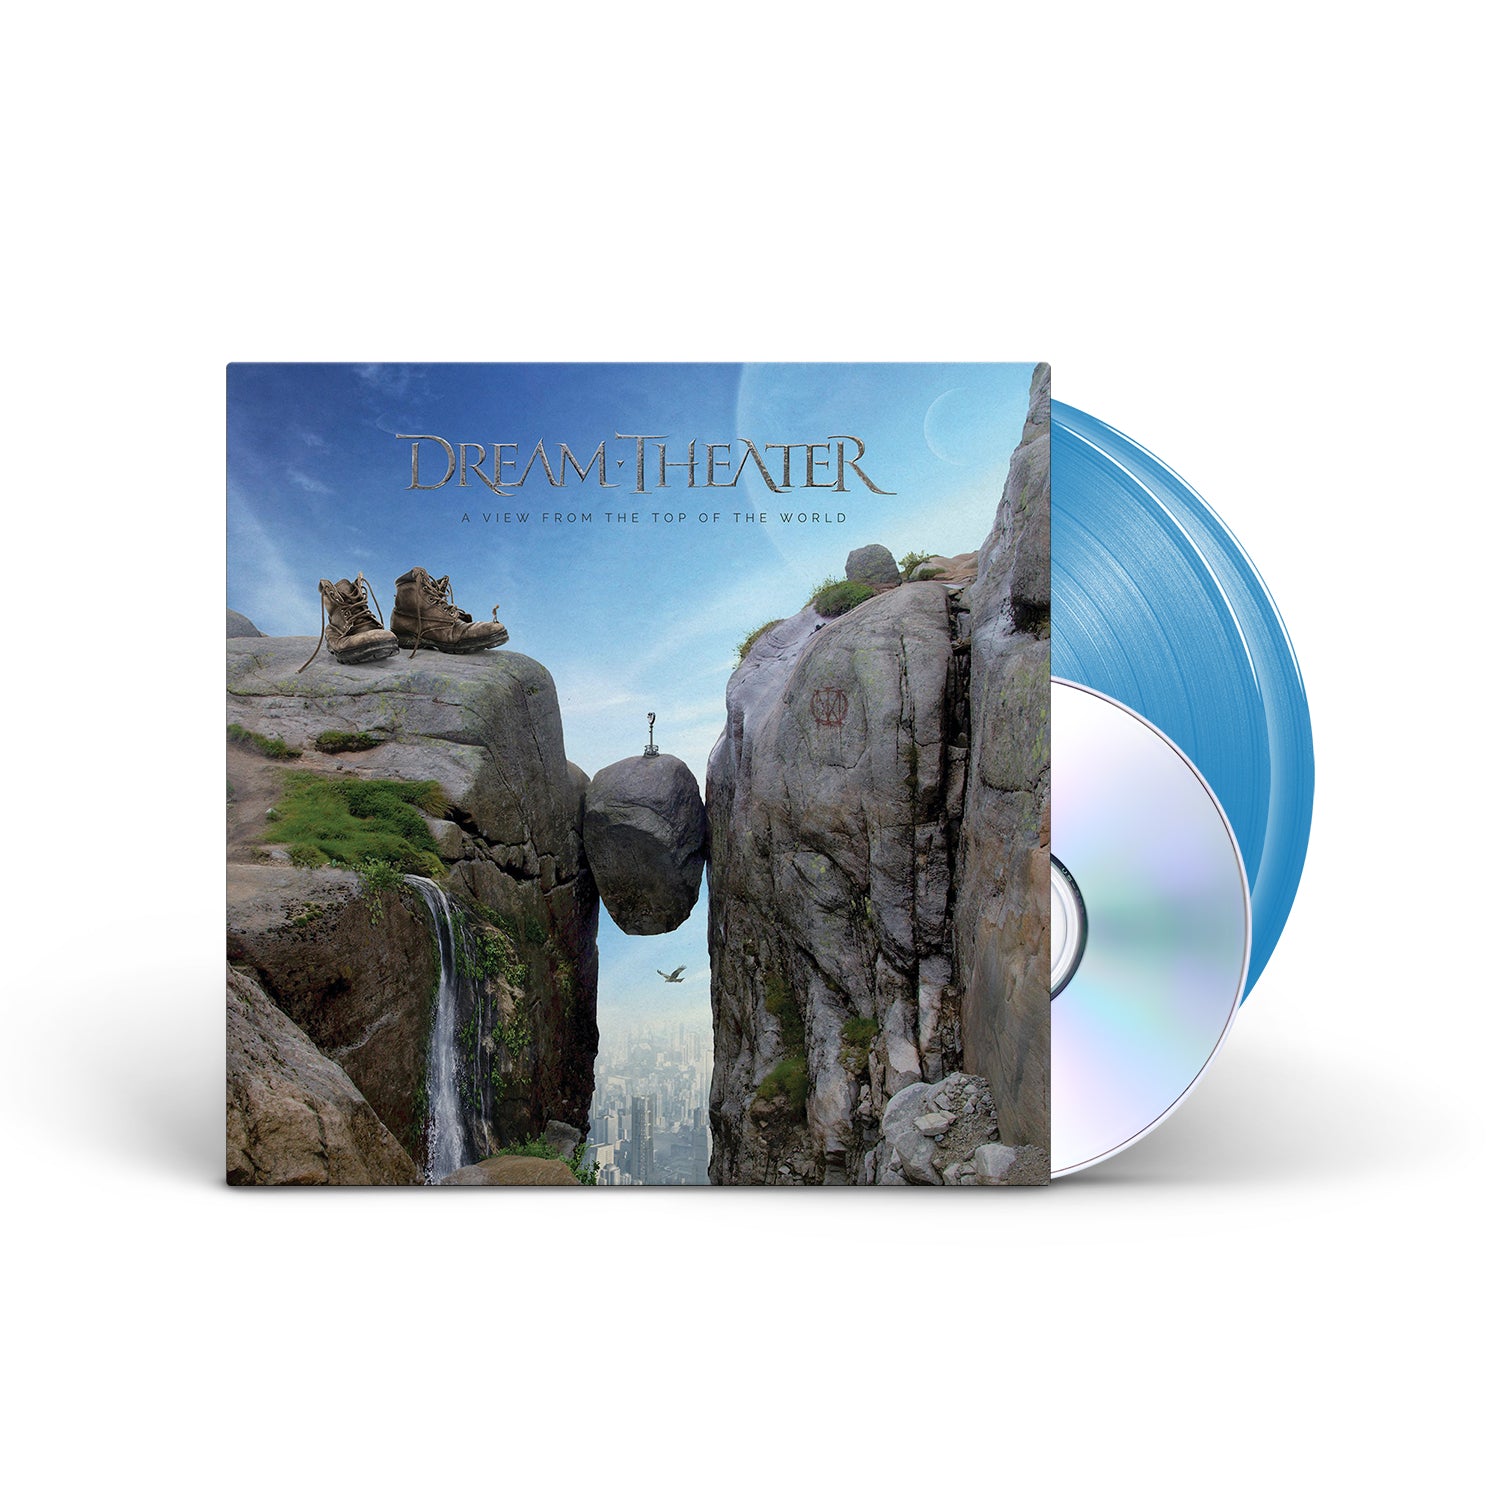 DREAM THEATER - A View From The Top Of The World - Sky Blue 2xLP + CD